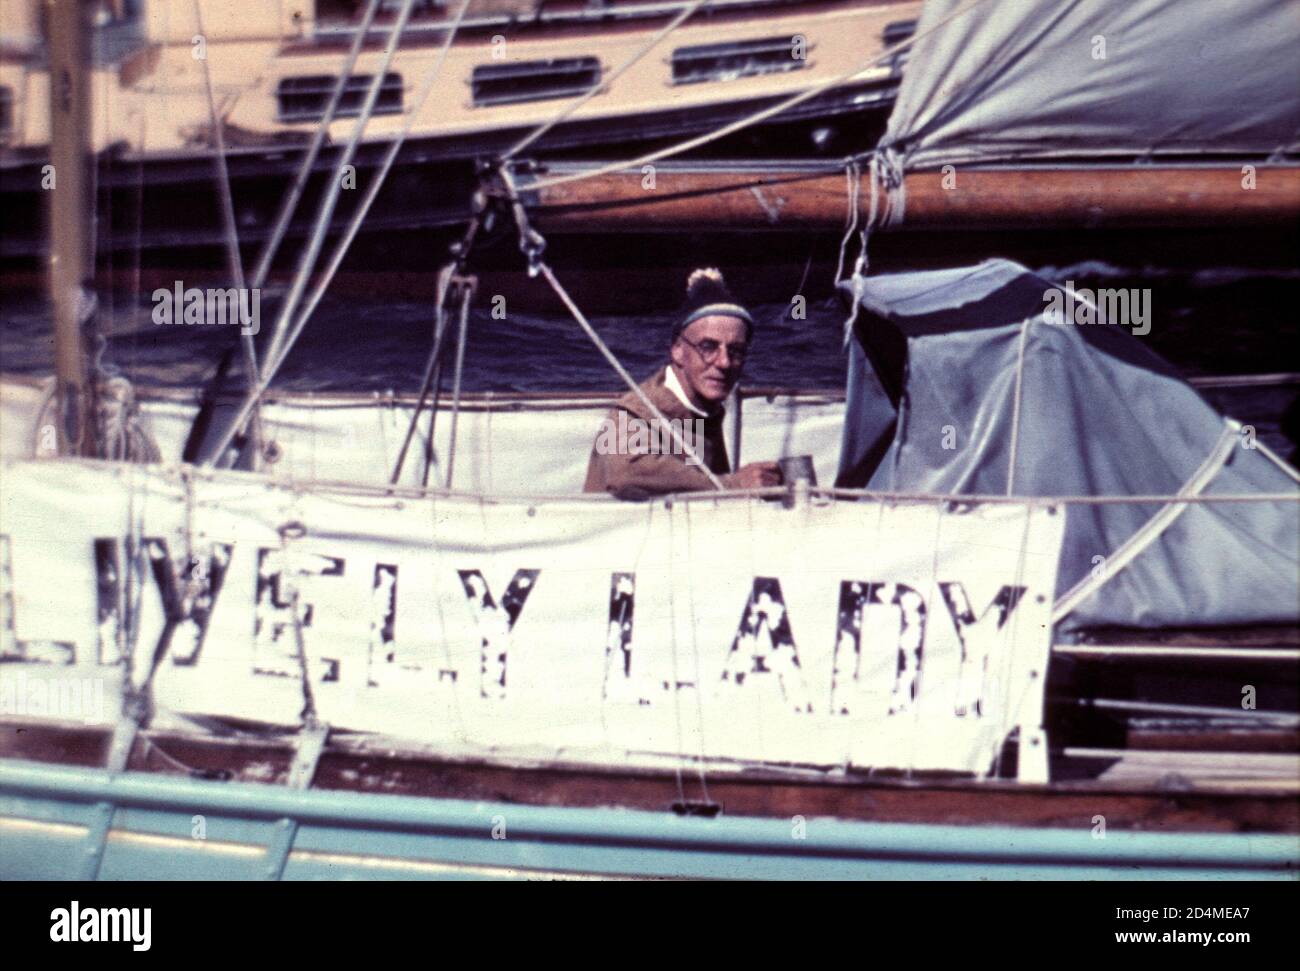 AJAXNETPHOTO. 4 JULY, 1968. SOUTHSEA, ENGLAND. - SAILING GROCER RETURNS - ALEC ROSE AT THE HELM OF HIS 36FT KETCH LIVELY LADY AS SHE RETURNED TO PORTSMOUTH AT THE END OF HIS SOLO ROUND THE WORLD VOYAGE. THE GREENGROCER FROM SOUTHSEA SAILED FROM THE CITY ON JULY 16TH, 1967. HIS WAS THE ONLY YACHT UNDER 40FT TO HAVE SAILED AROUND THE WORLD WITH TWO STOPS OR LESS AND THE SECOND YACHT OF ANY SIZE TO HAVE COMPLETED THE 28,000 MILE VOYAGE. ROSE WAS ALSO THE SECOND GROCER IN HISTORY TO BE ELECTED A MEMBER OF THE ROYAL YACHT SQUADRON.(FIRST WAS SIR THOMAS LIPTON). PHOTO:JONATHAN EASTLAND/AJAX REF:2120 Stock Photo